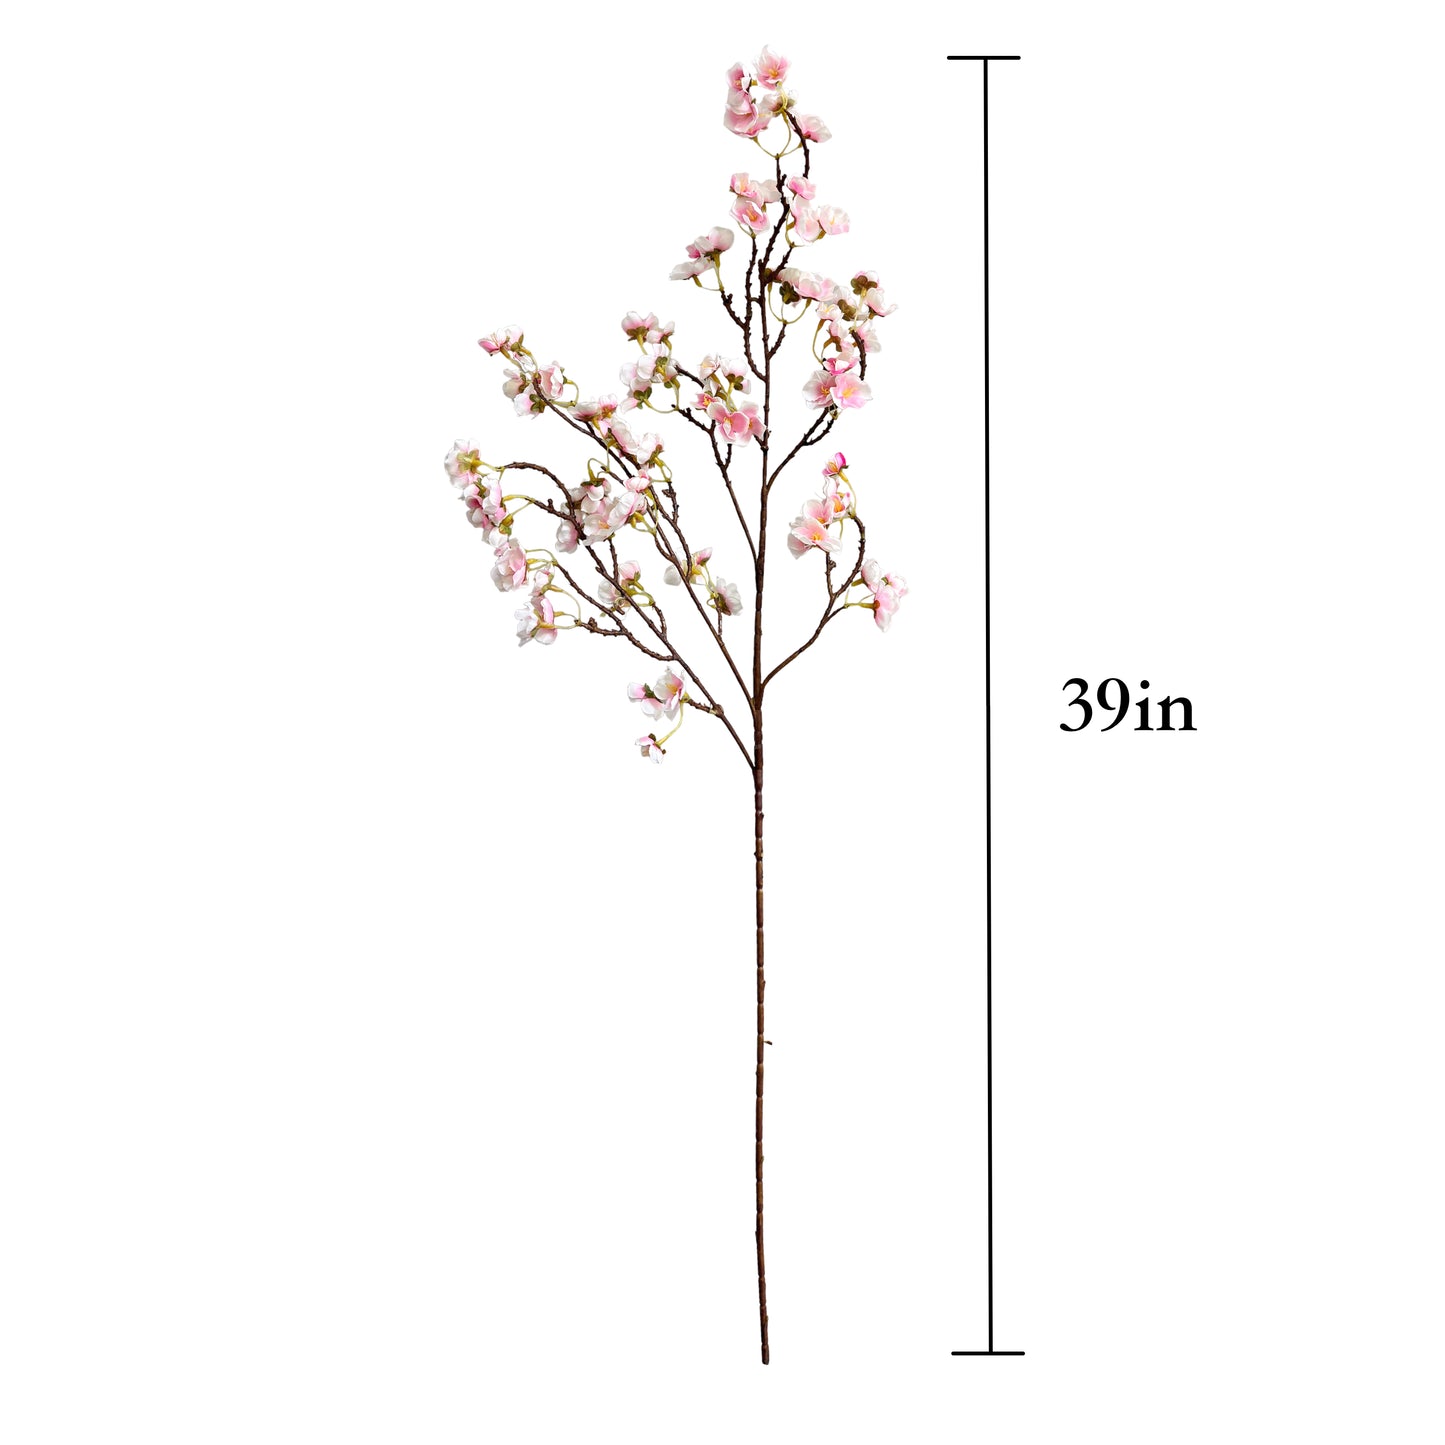 39 inch Tall Artificial Cherry Blossom Stems (set of 2)